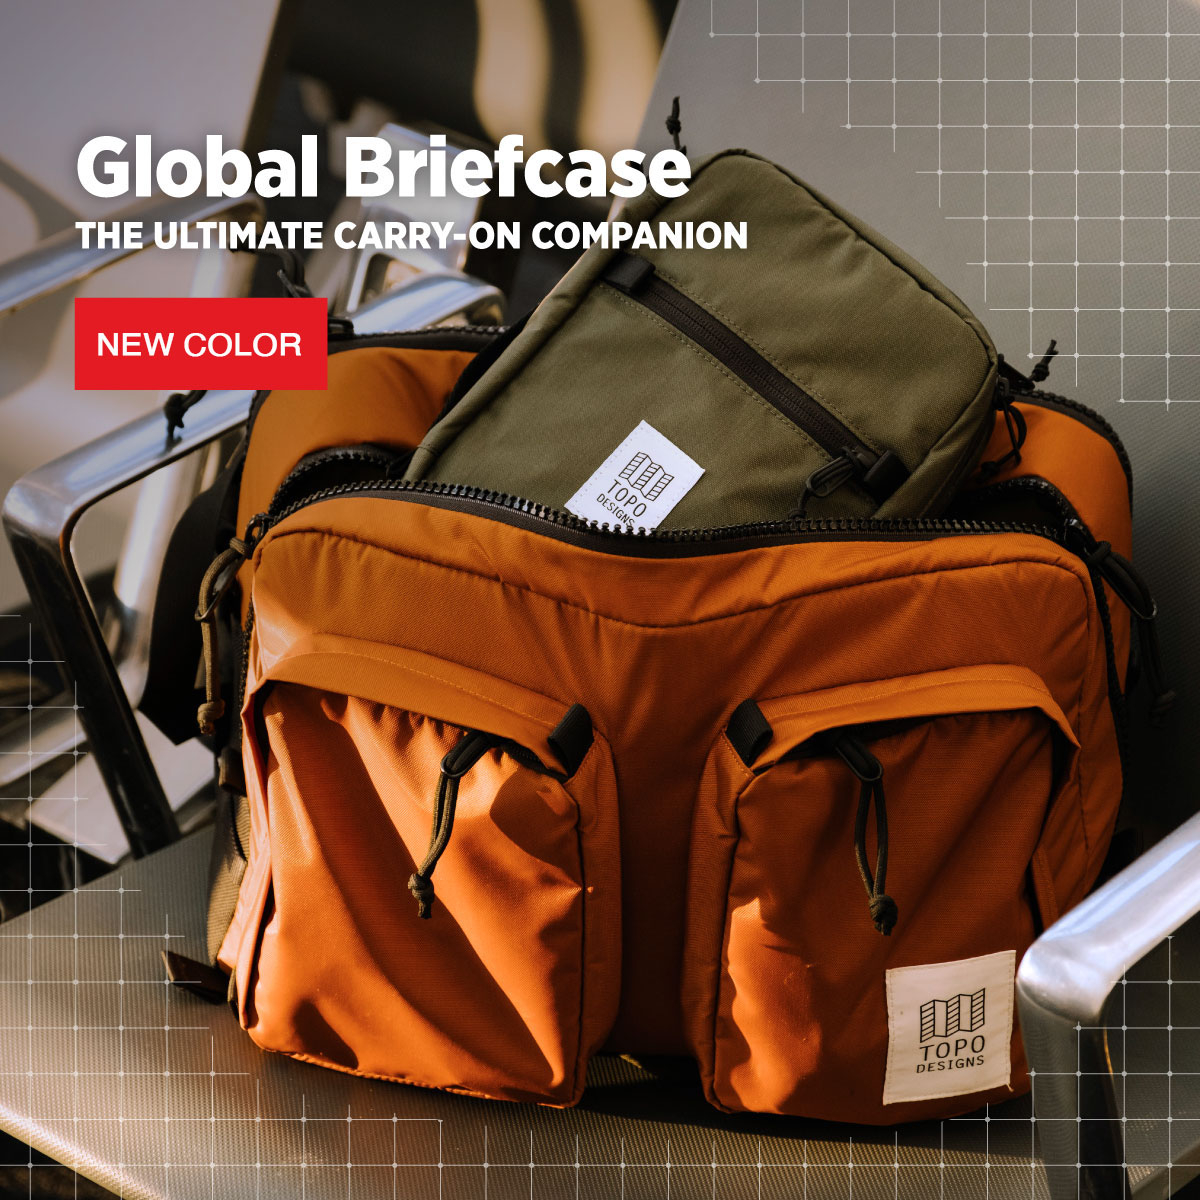 Topo Designs Global Briefcase Clay, the perfect bag for everyday carry